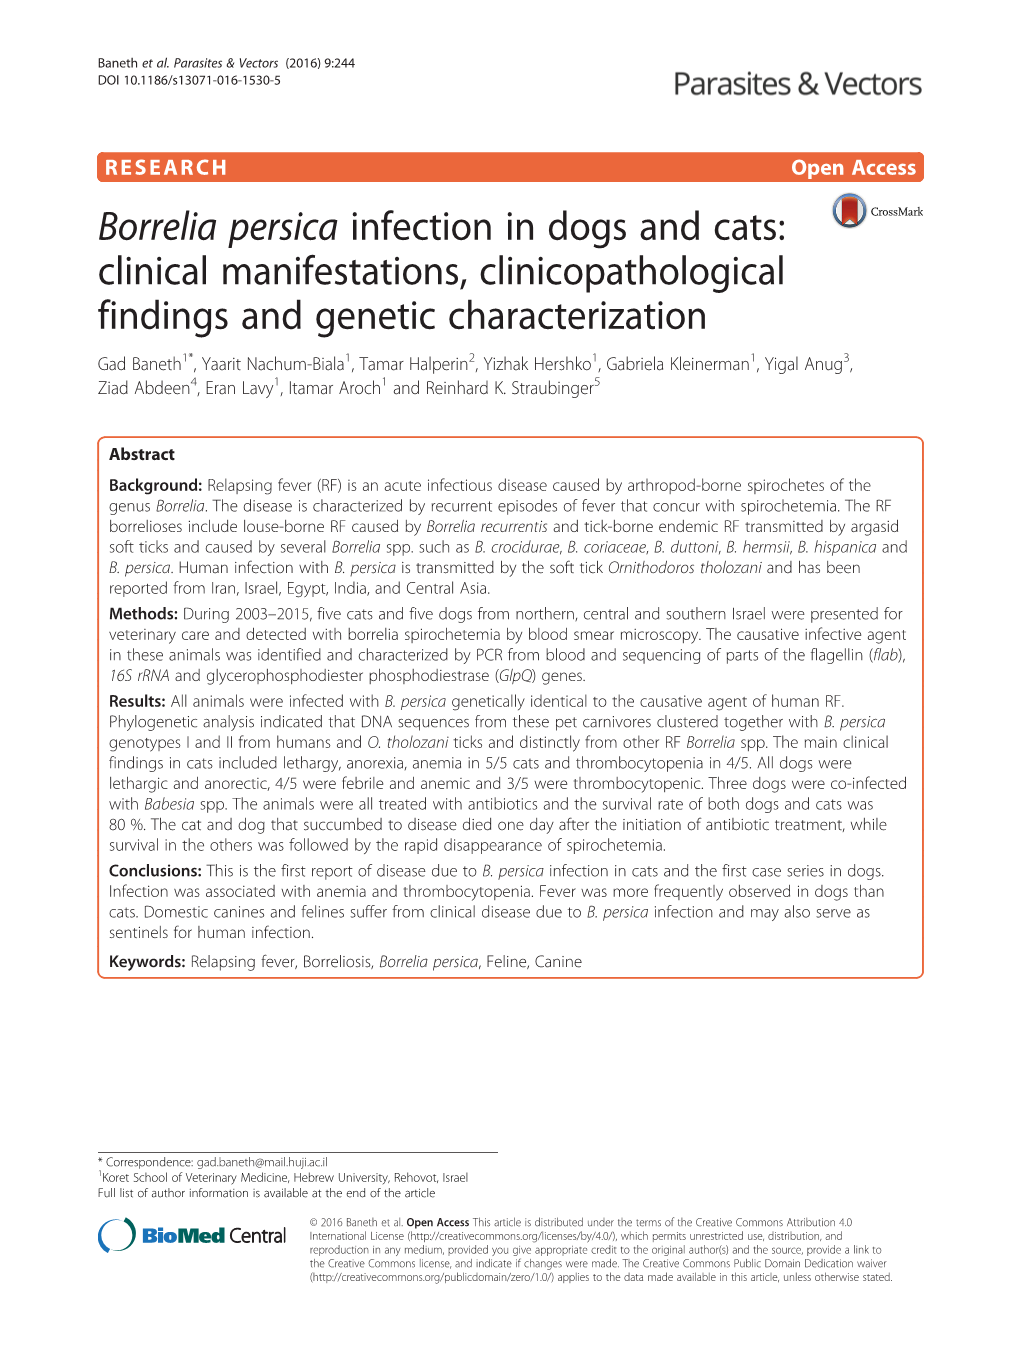 Borrelia Persica Infection in Dogs and Cats